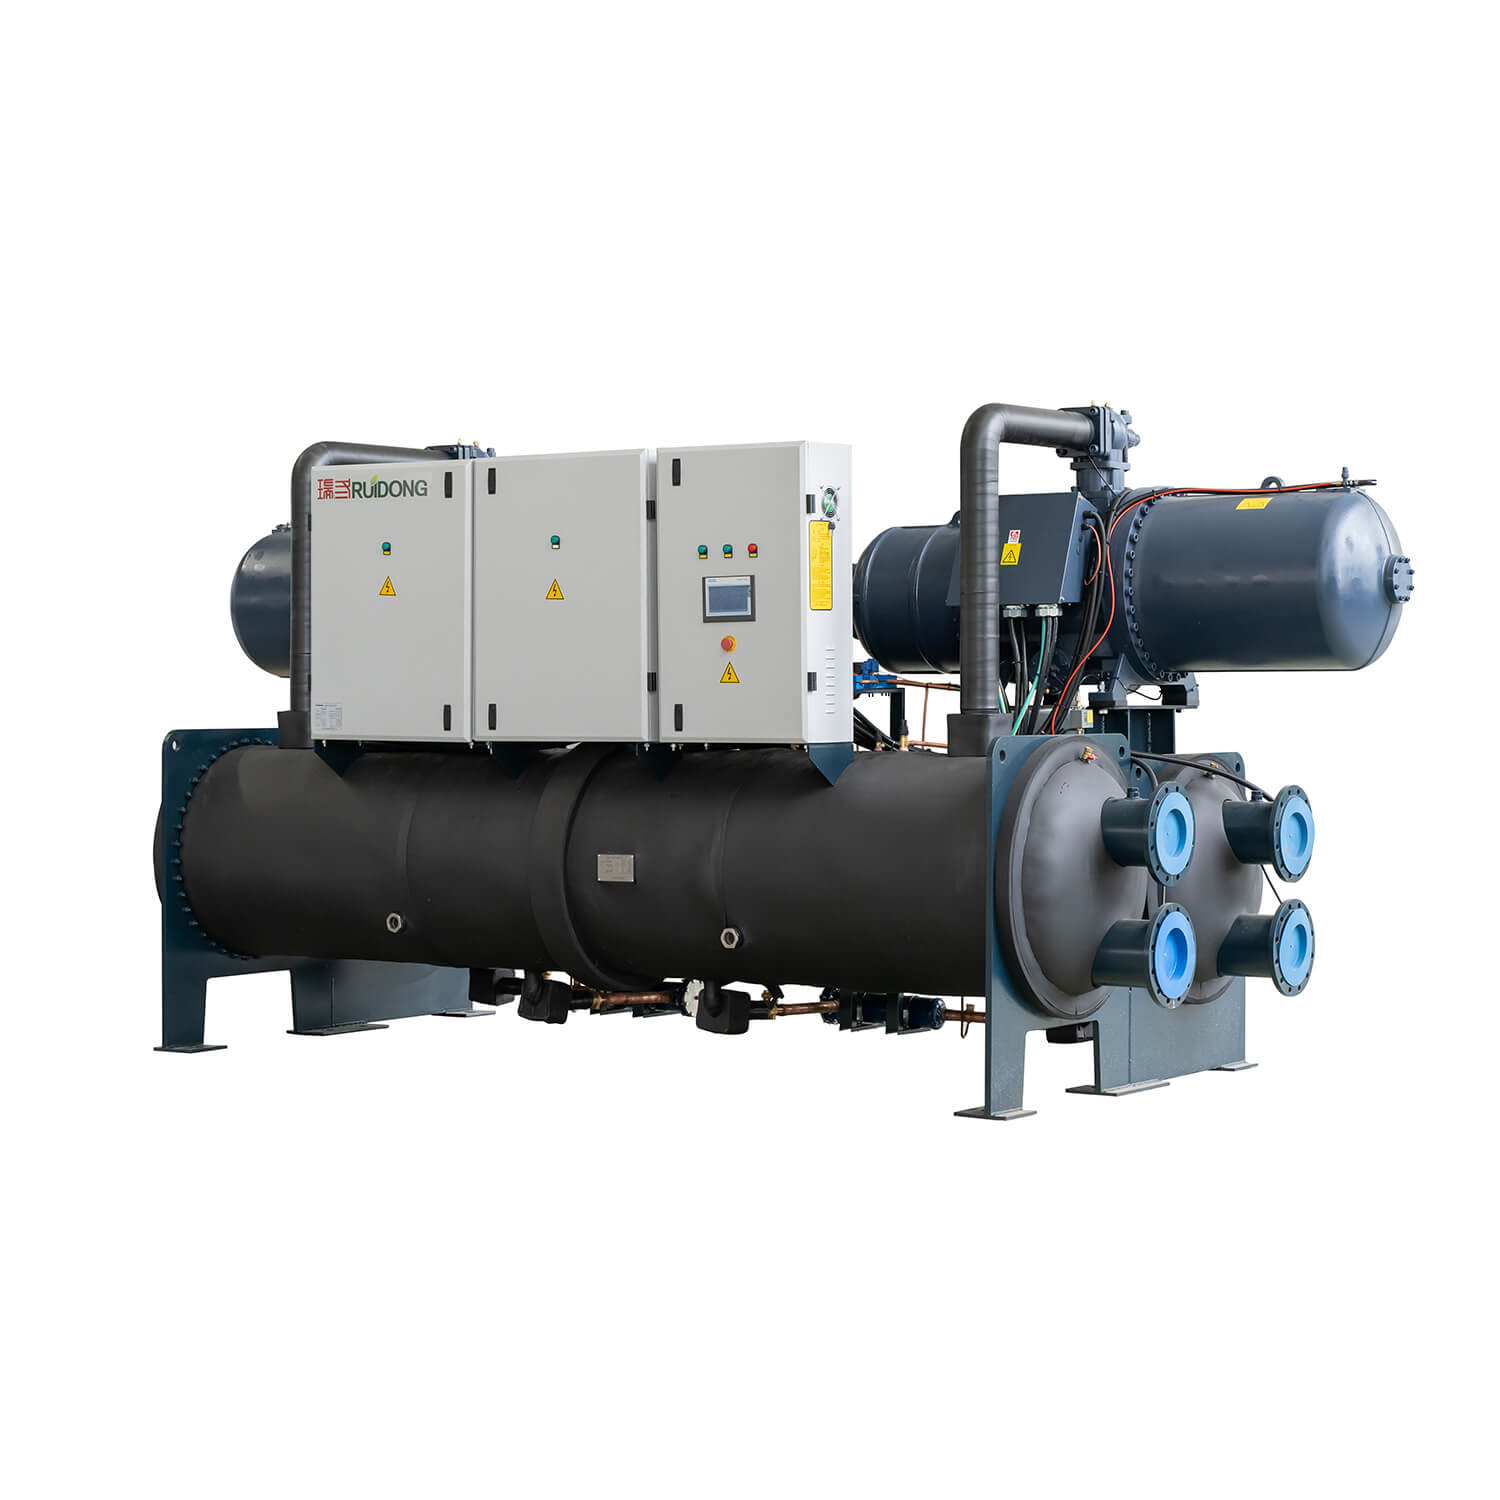 Water Cooled Screw Chillers: The Ultimate Solution for Industrial Cooling and Heating